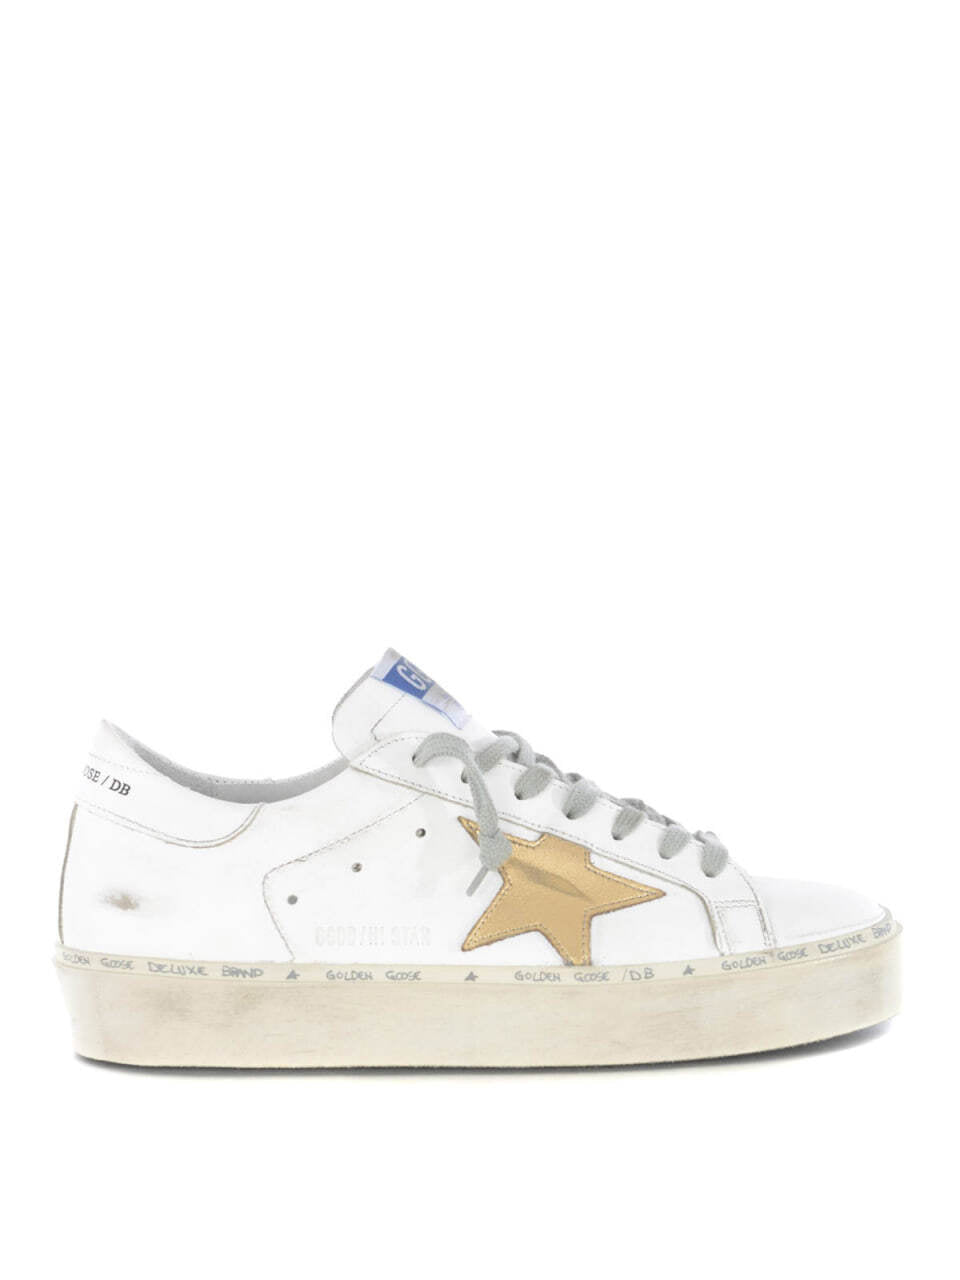 Golden Goose Hi Star White and Gold Leather Sneakers